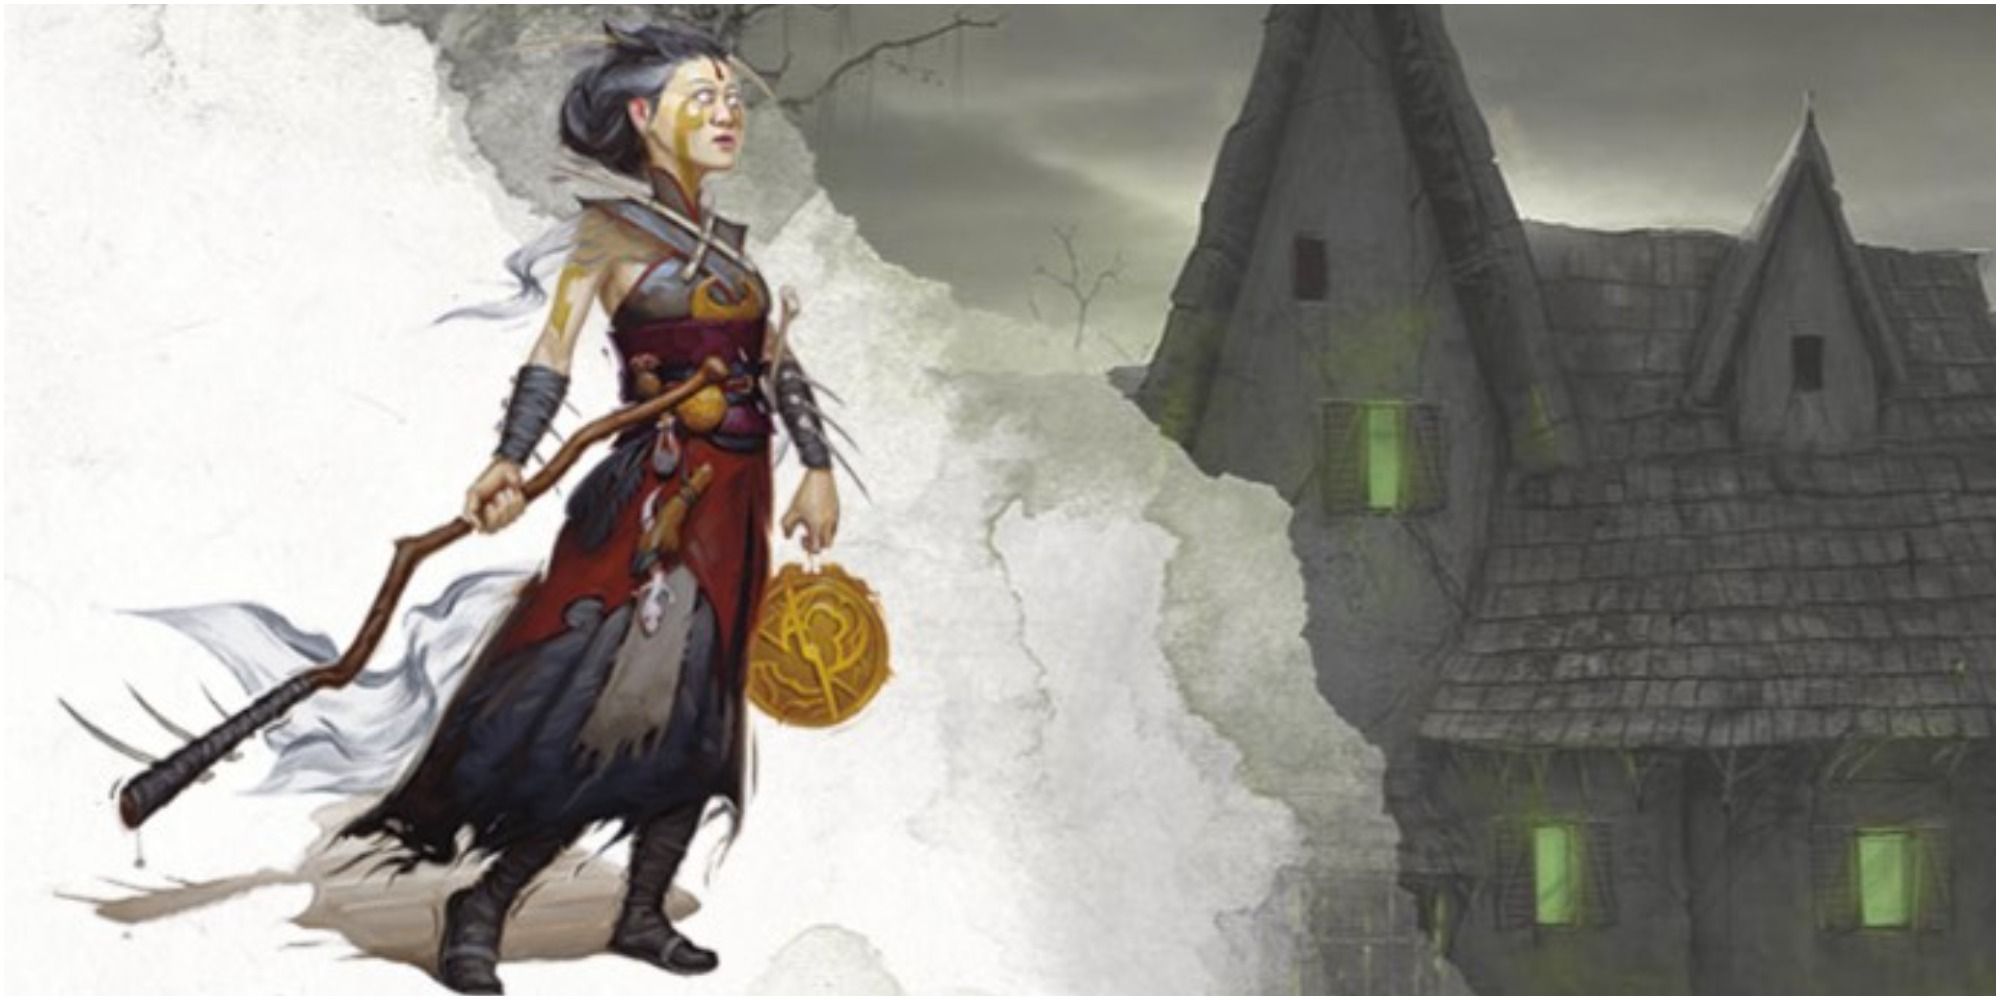 Dungeons And Dragons Warlock Image On Website